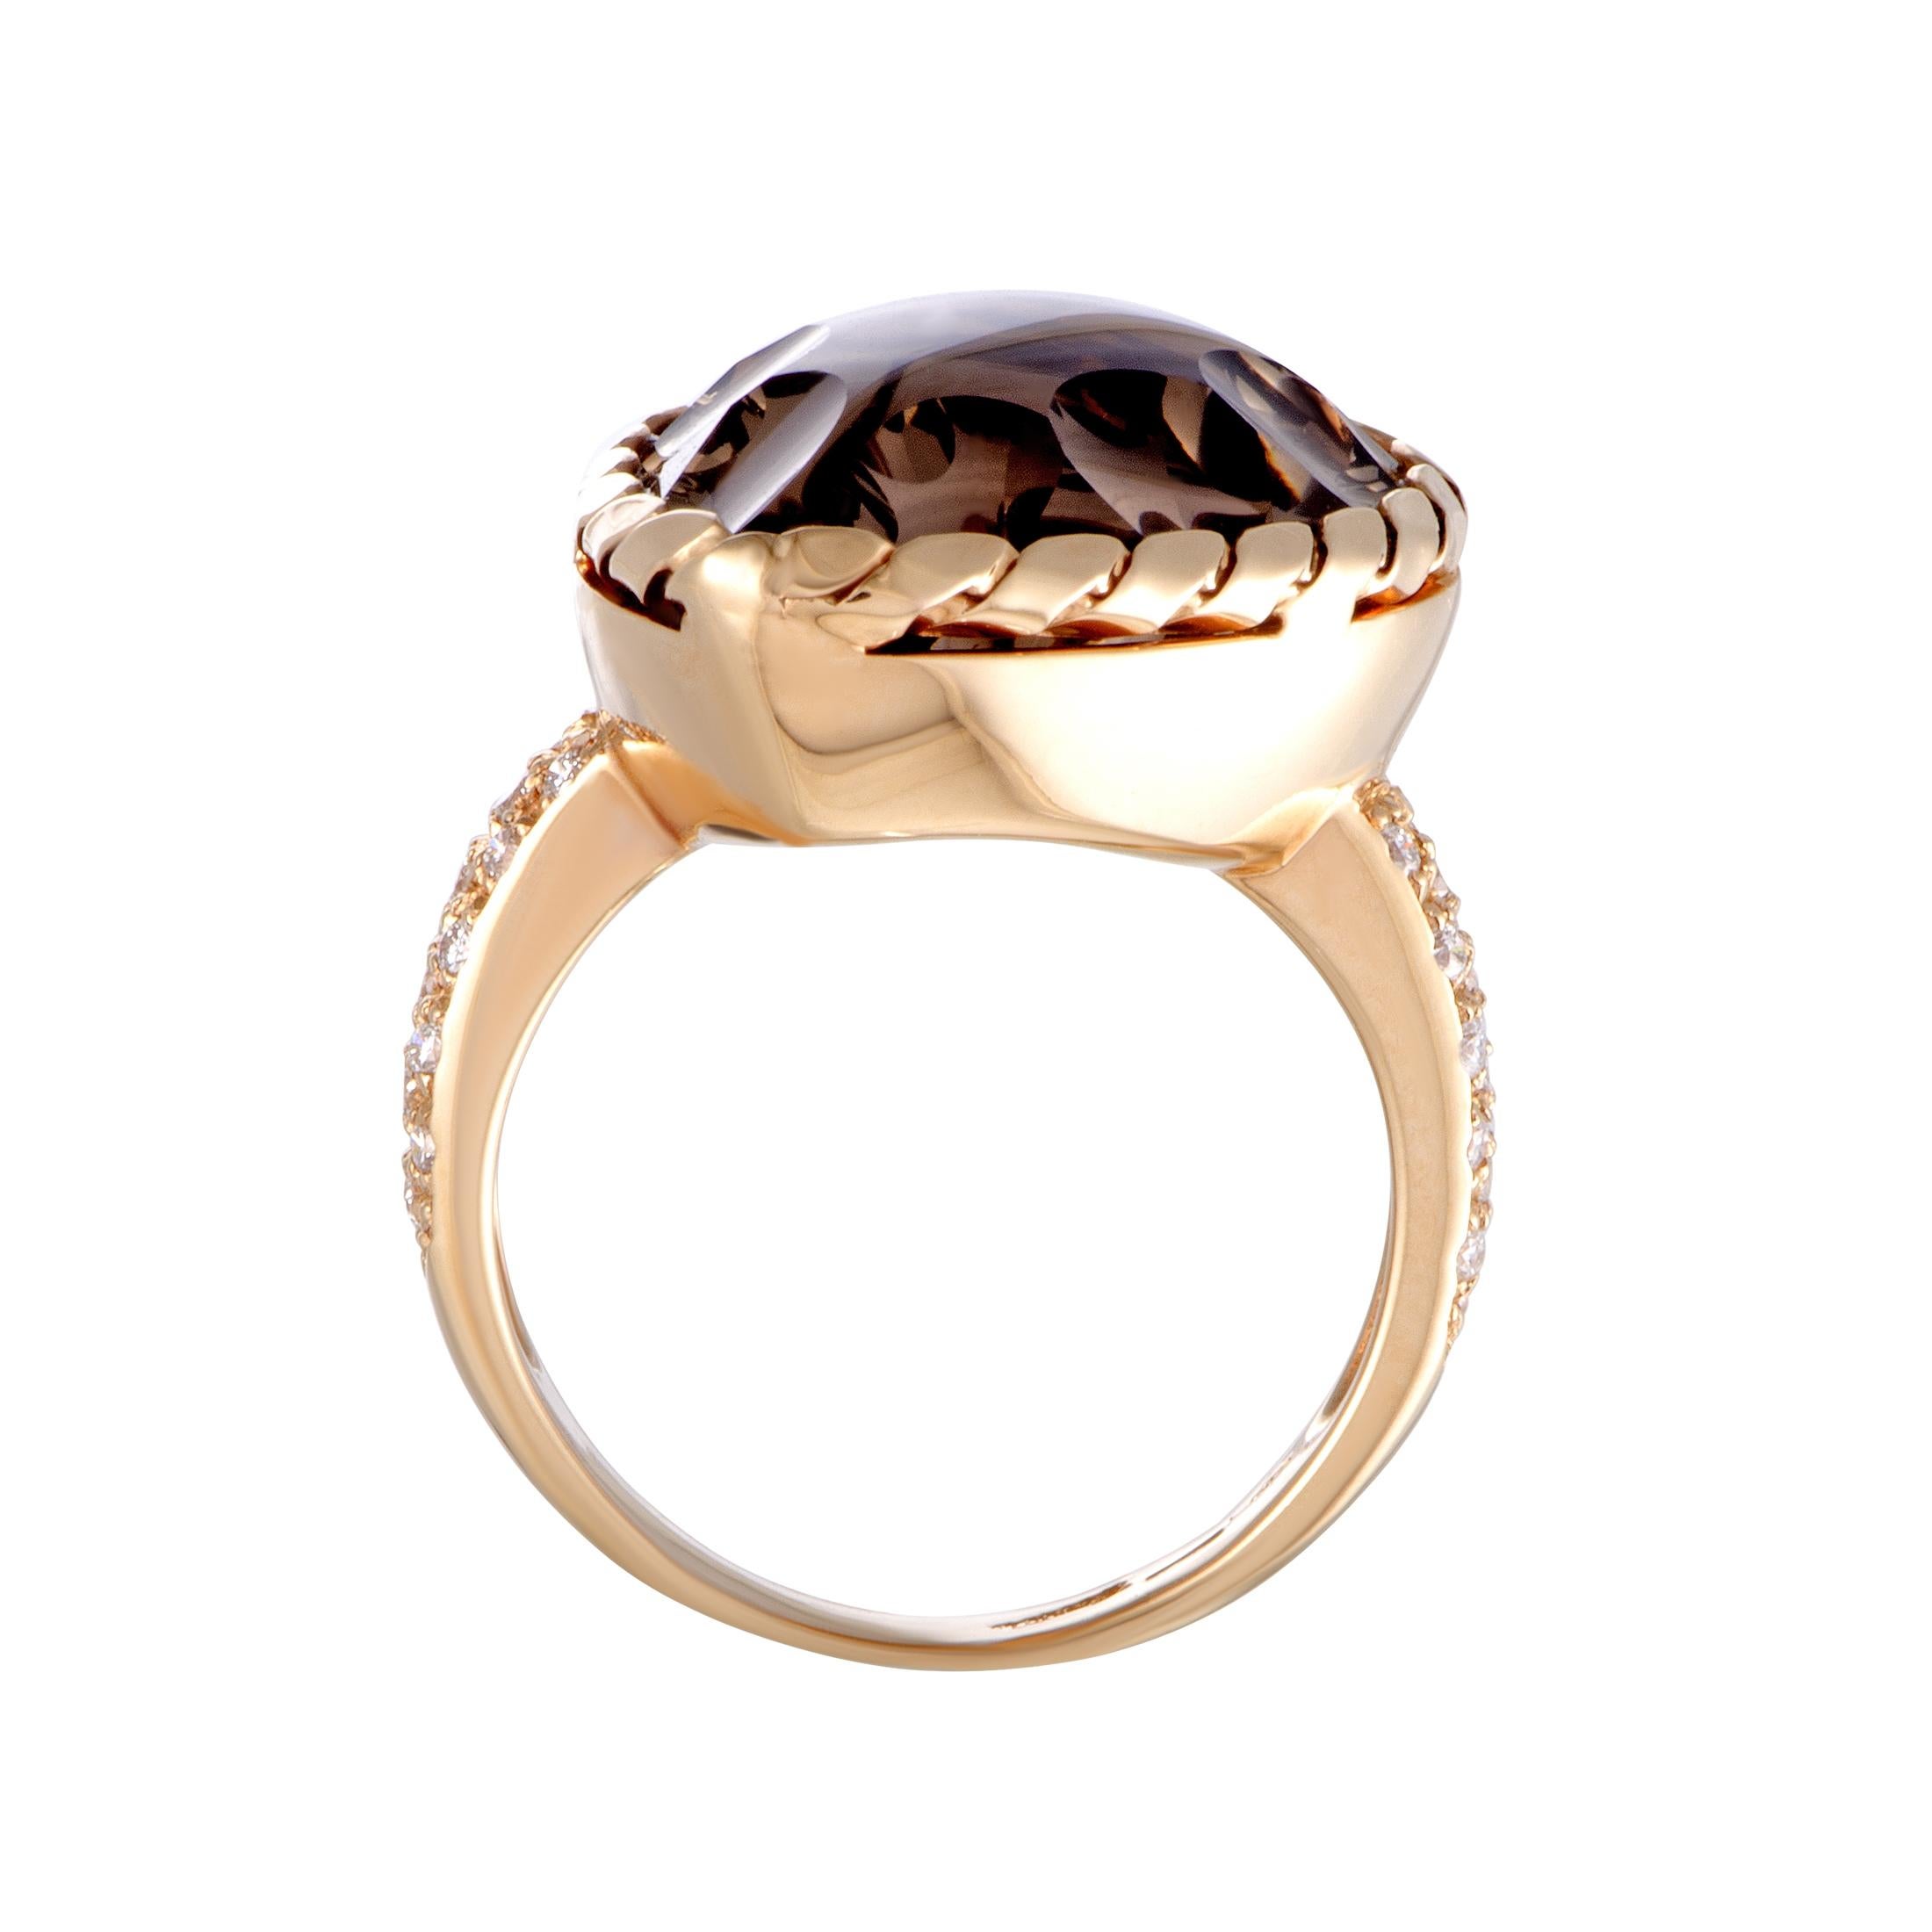 The stunningly offbeat cut of the smoky topaz adds a nifty twist to this classically designed ring that is exquisitely crafted from 18K rose gold. The ring is also embellished with glistening diamond stones that amount to 0.20 carats.
Ring Top